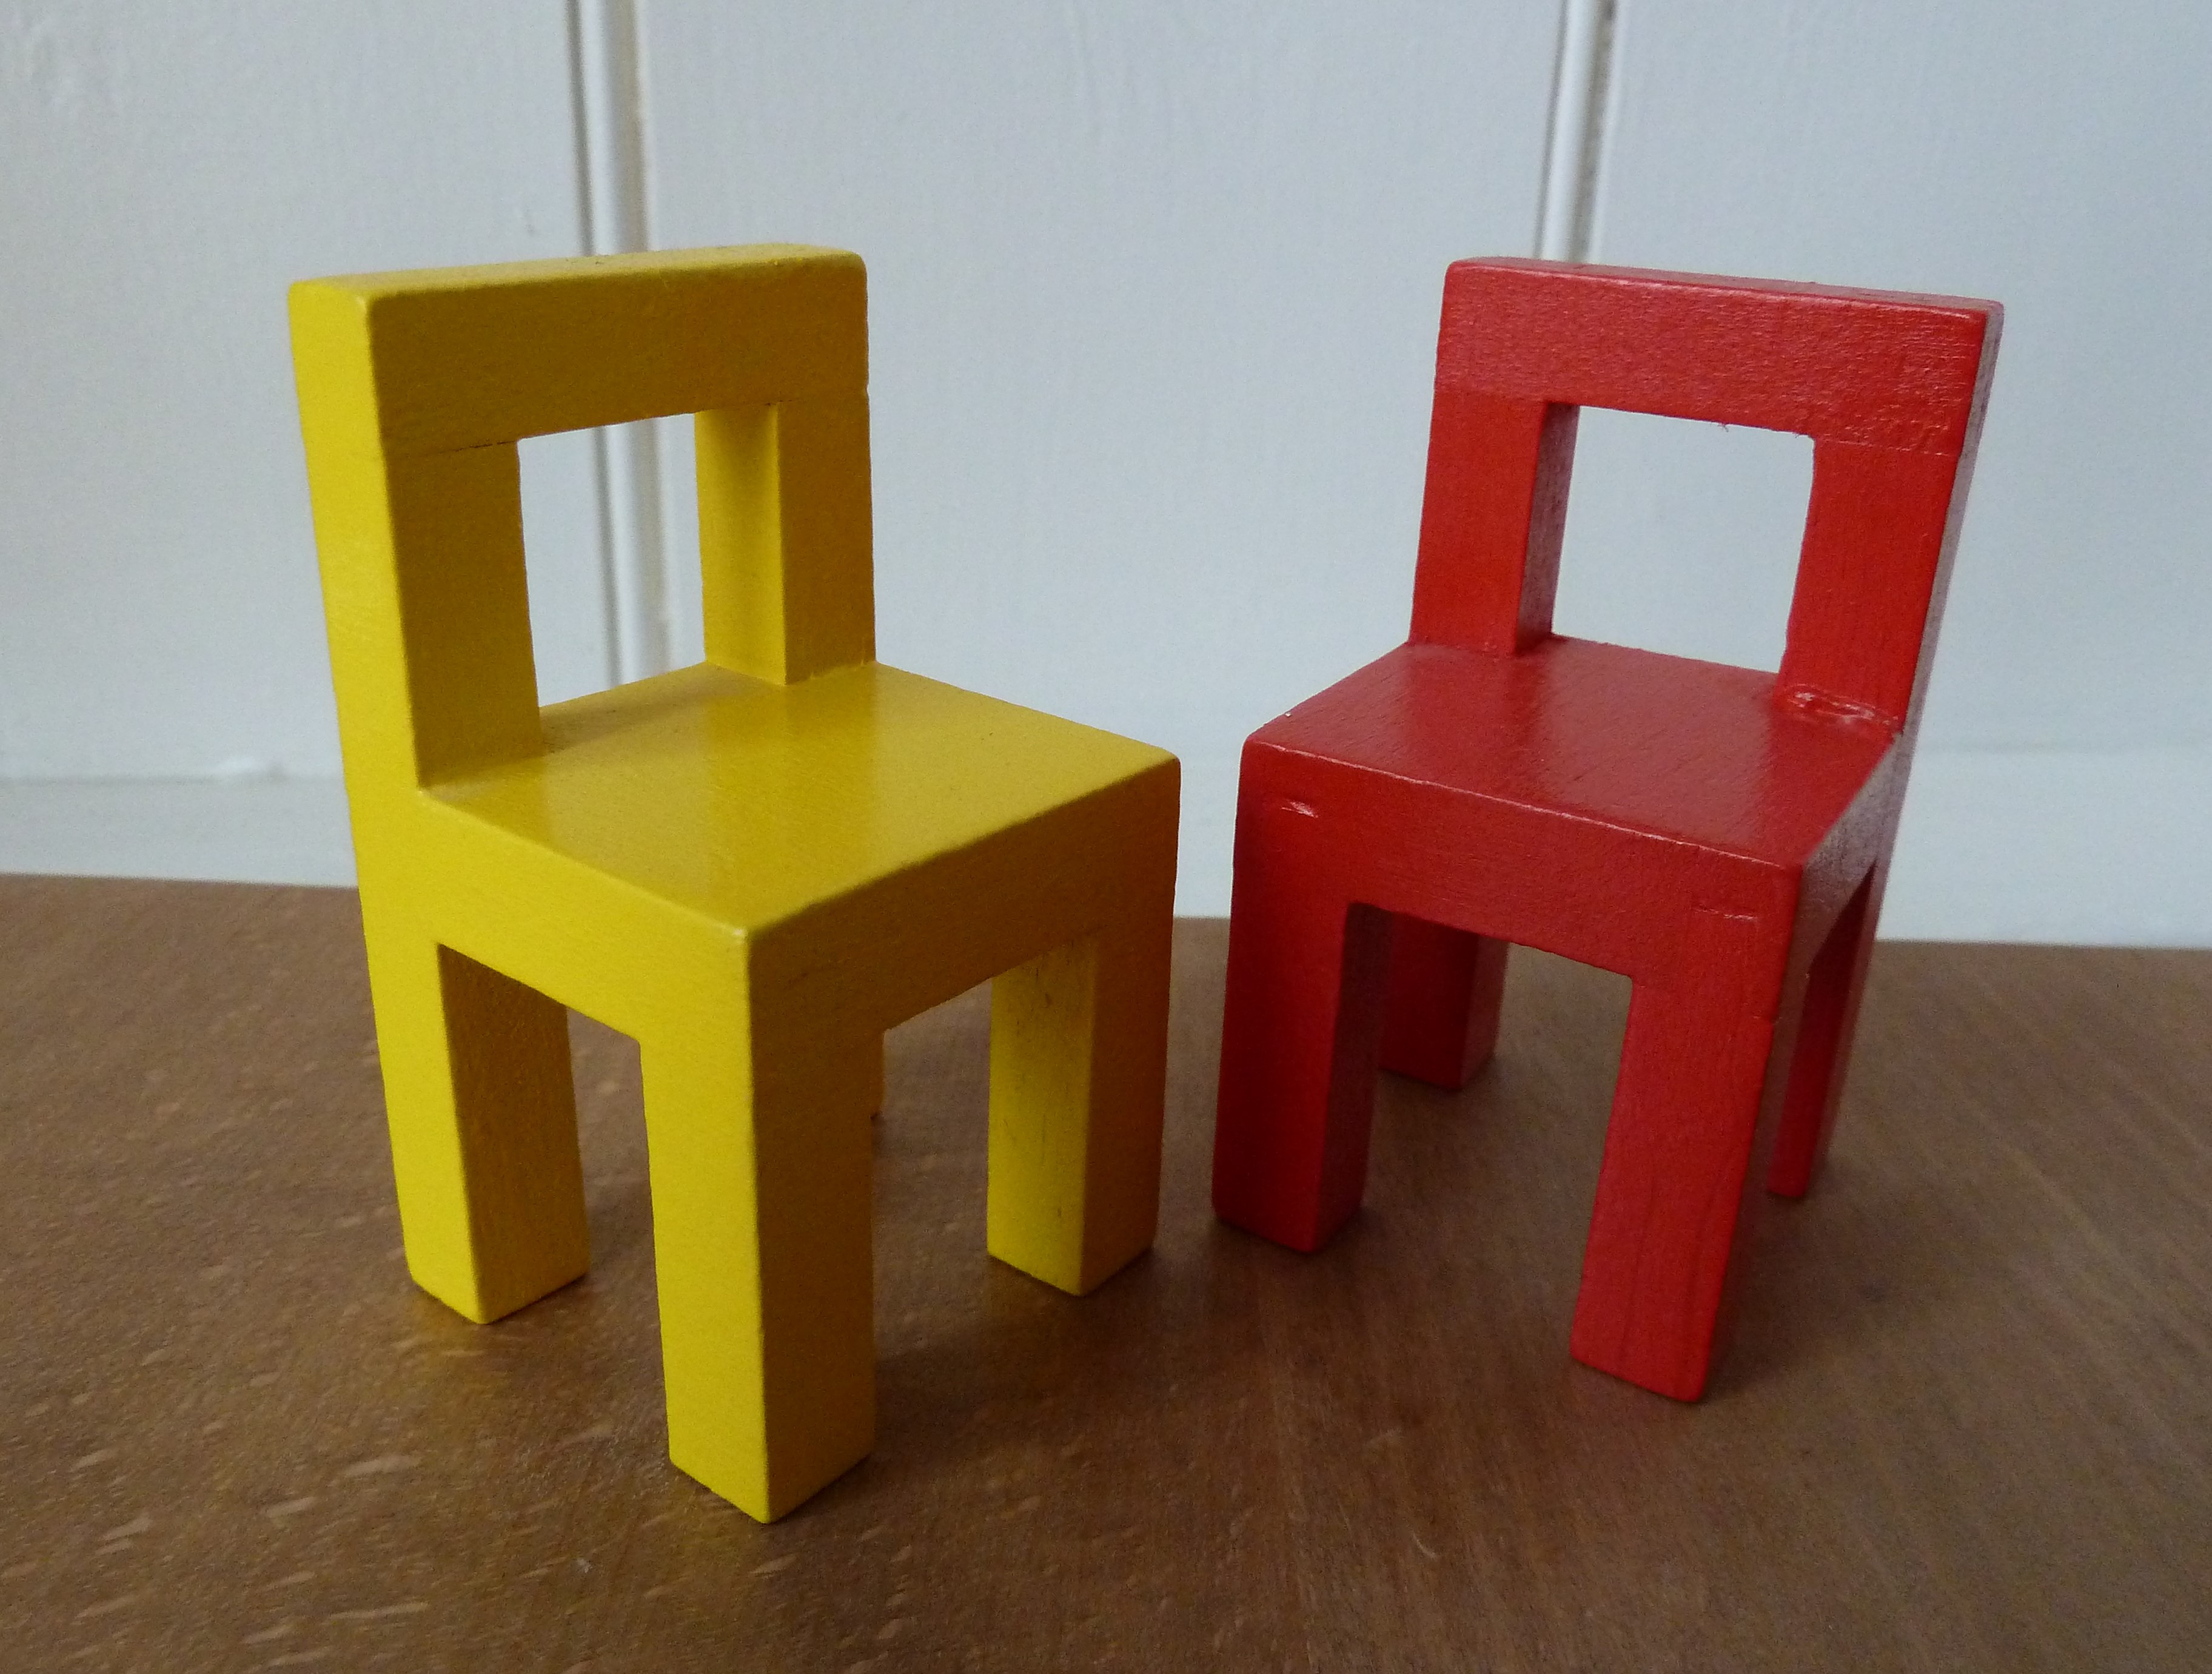 Picture of toy wooden chairs